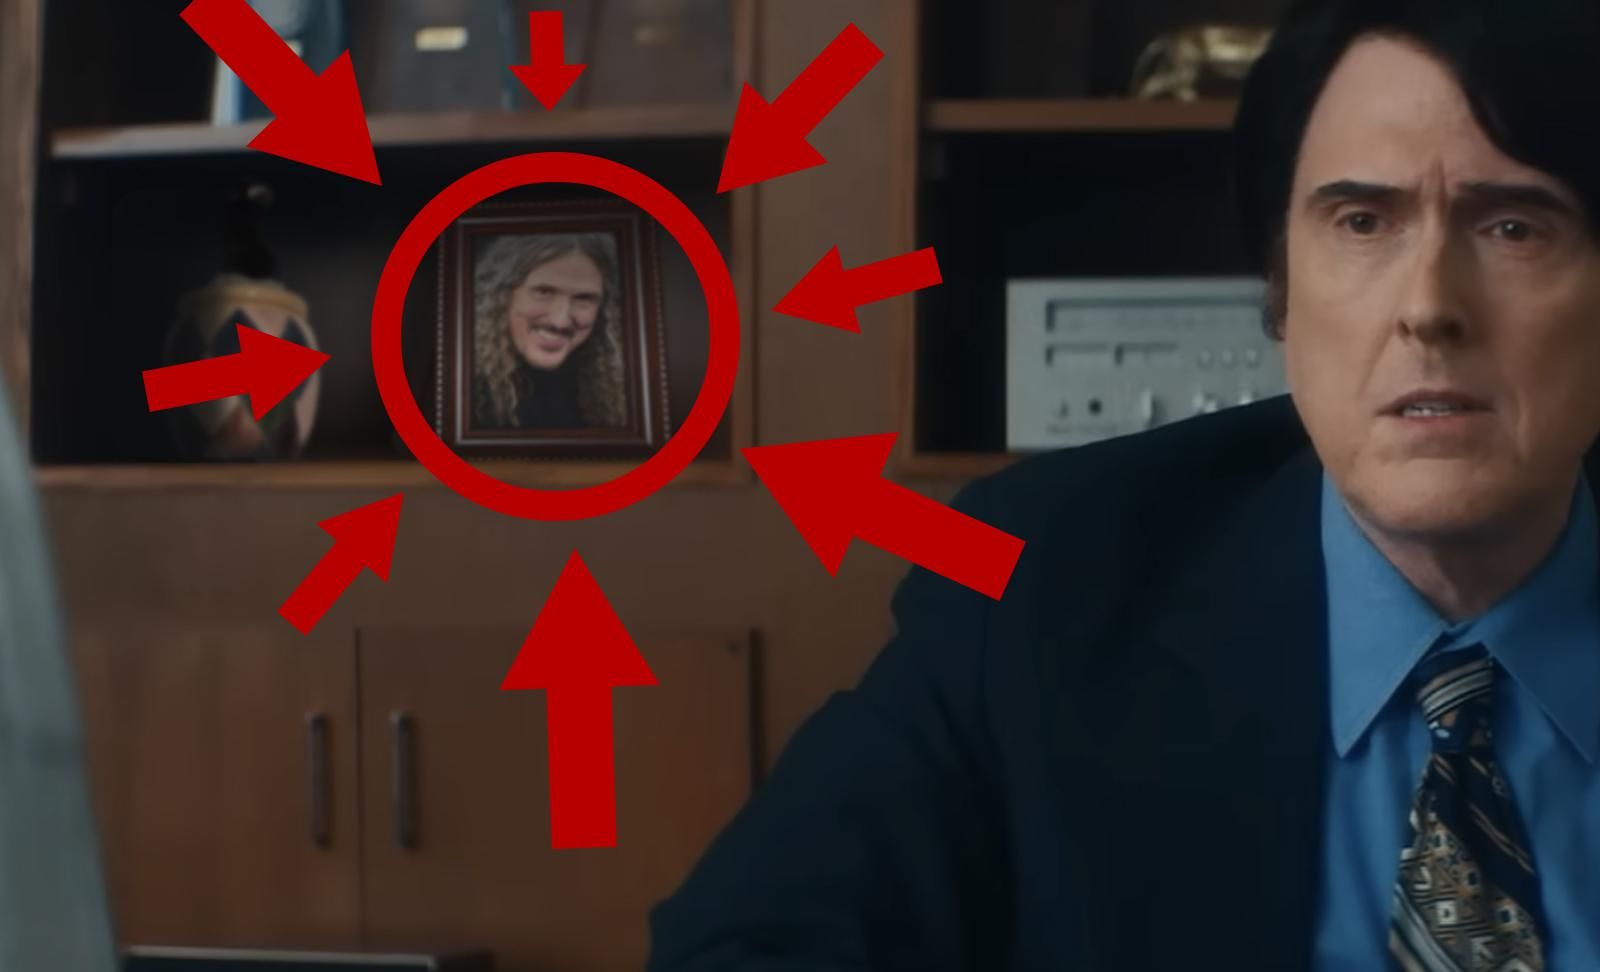 It took hours upon hours of frame-by-frame searching, but I finally found Weird Al's "cameo" in the trailer for his movie.